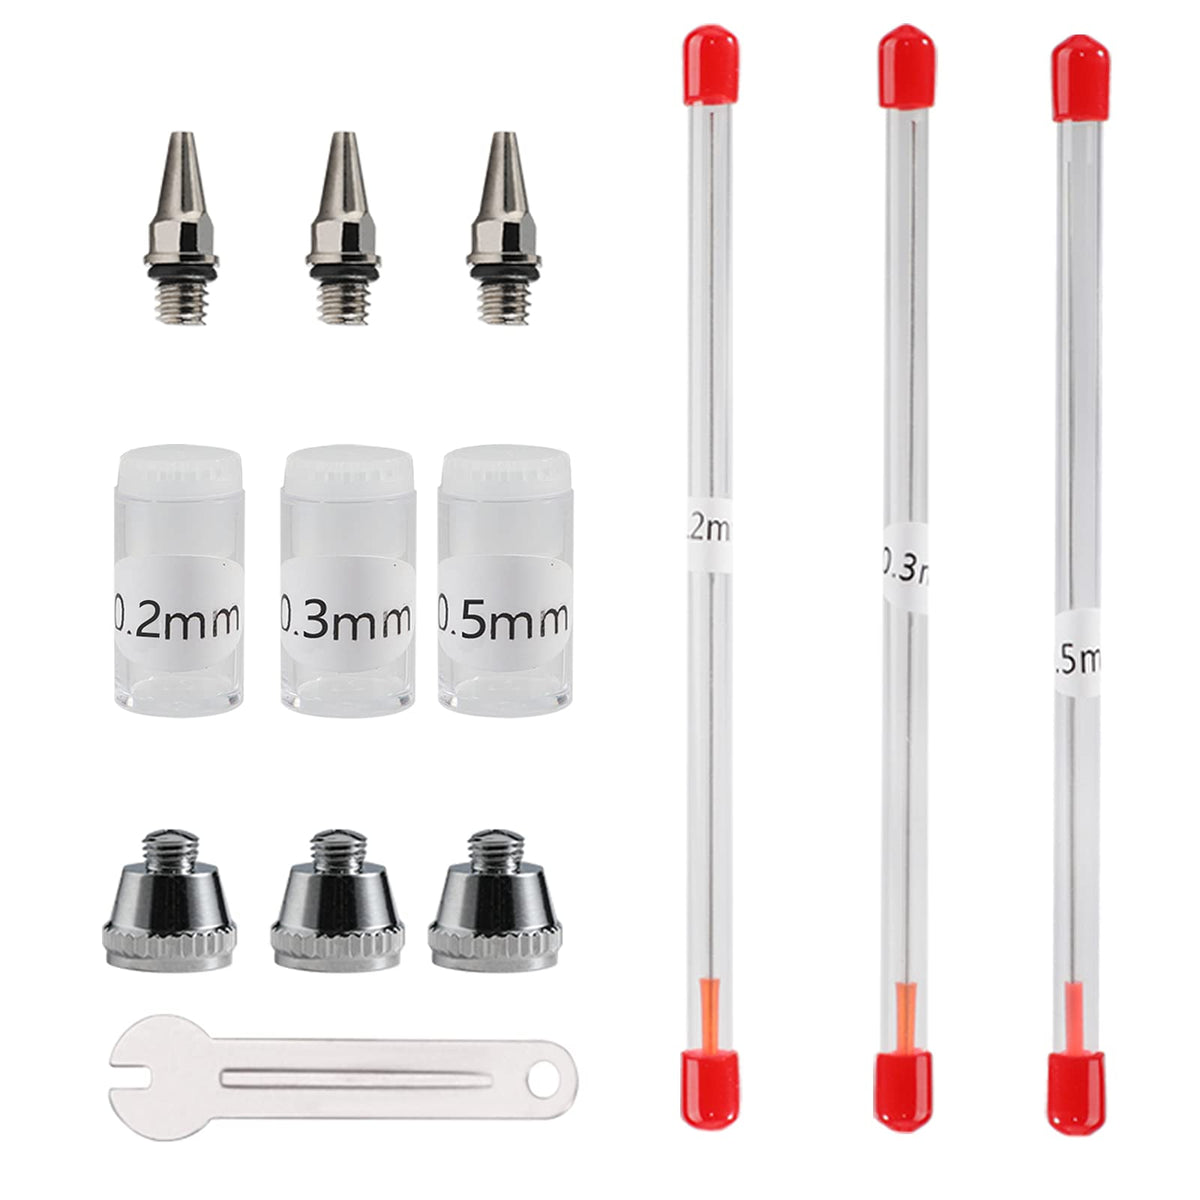 Spedertool Airbrush kit with Acrylic Airbrush Paint,Complete Air Brush Set  with Professional 12Pcs x10ml Airbrush Color Set Acrylic Model Paint for